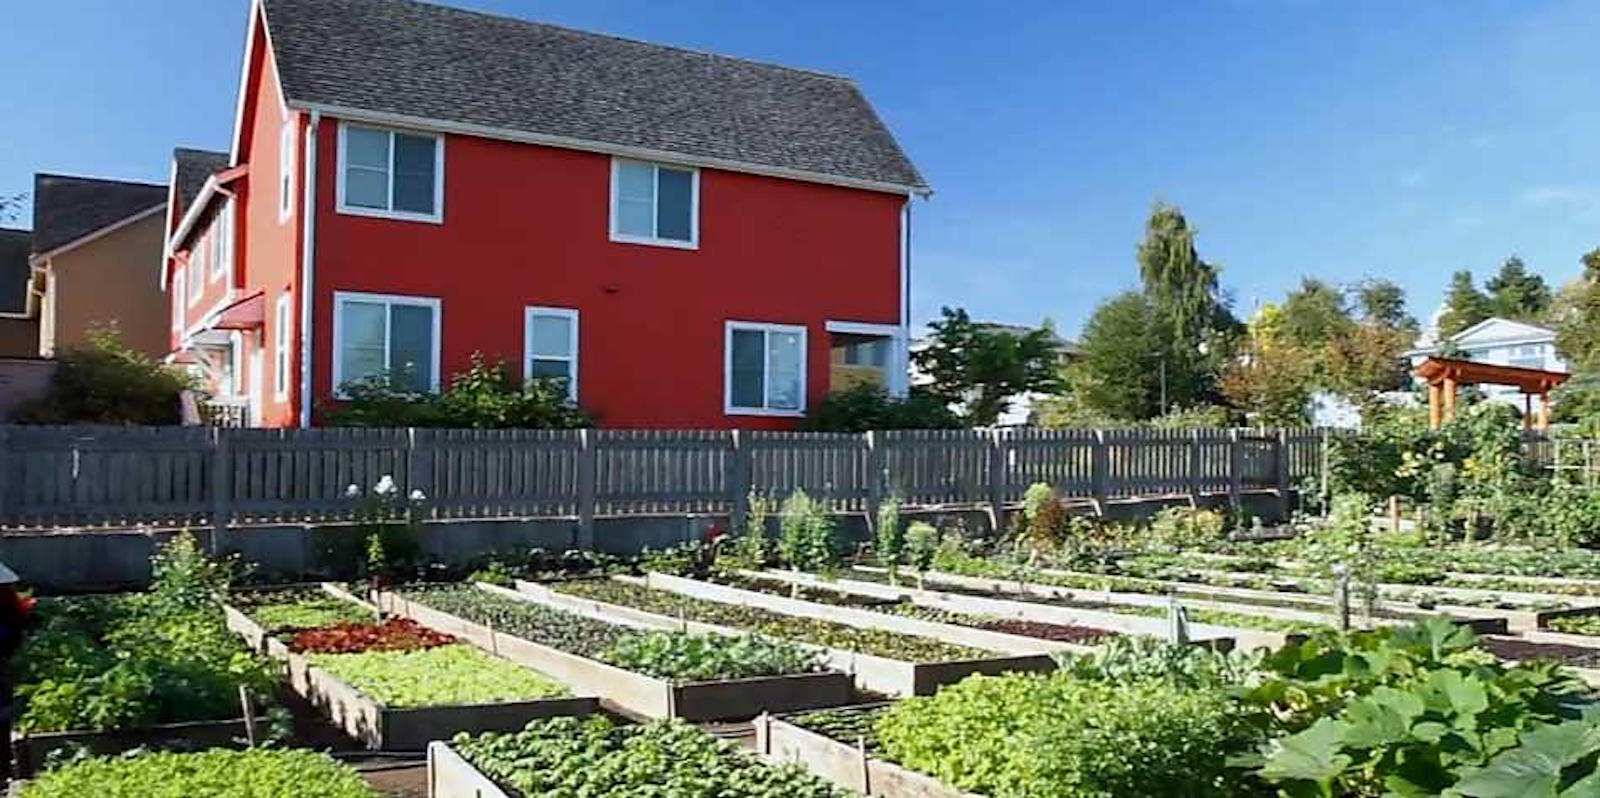 affordable housing with garden